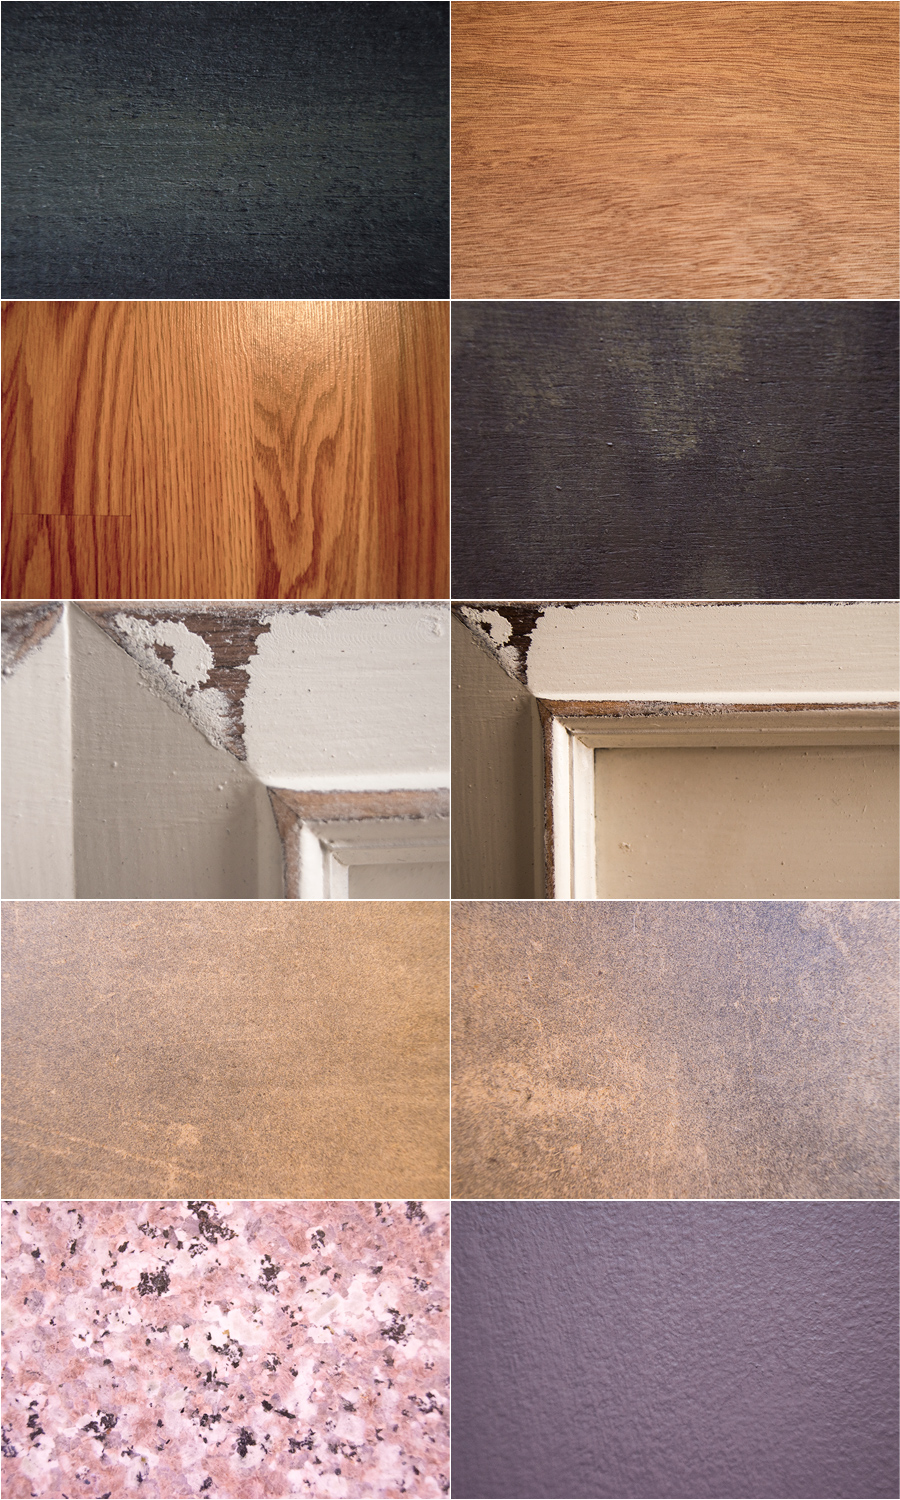 40 Free Textures to use in your designs by Blank Media Printing - wood and grain textures